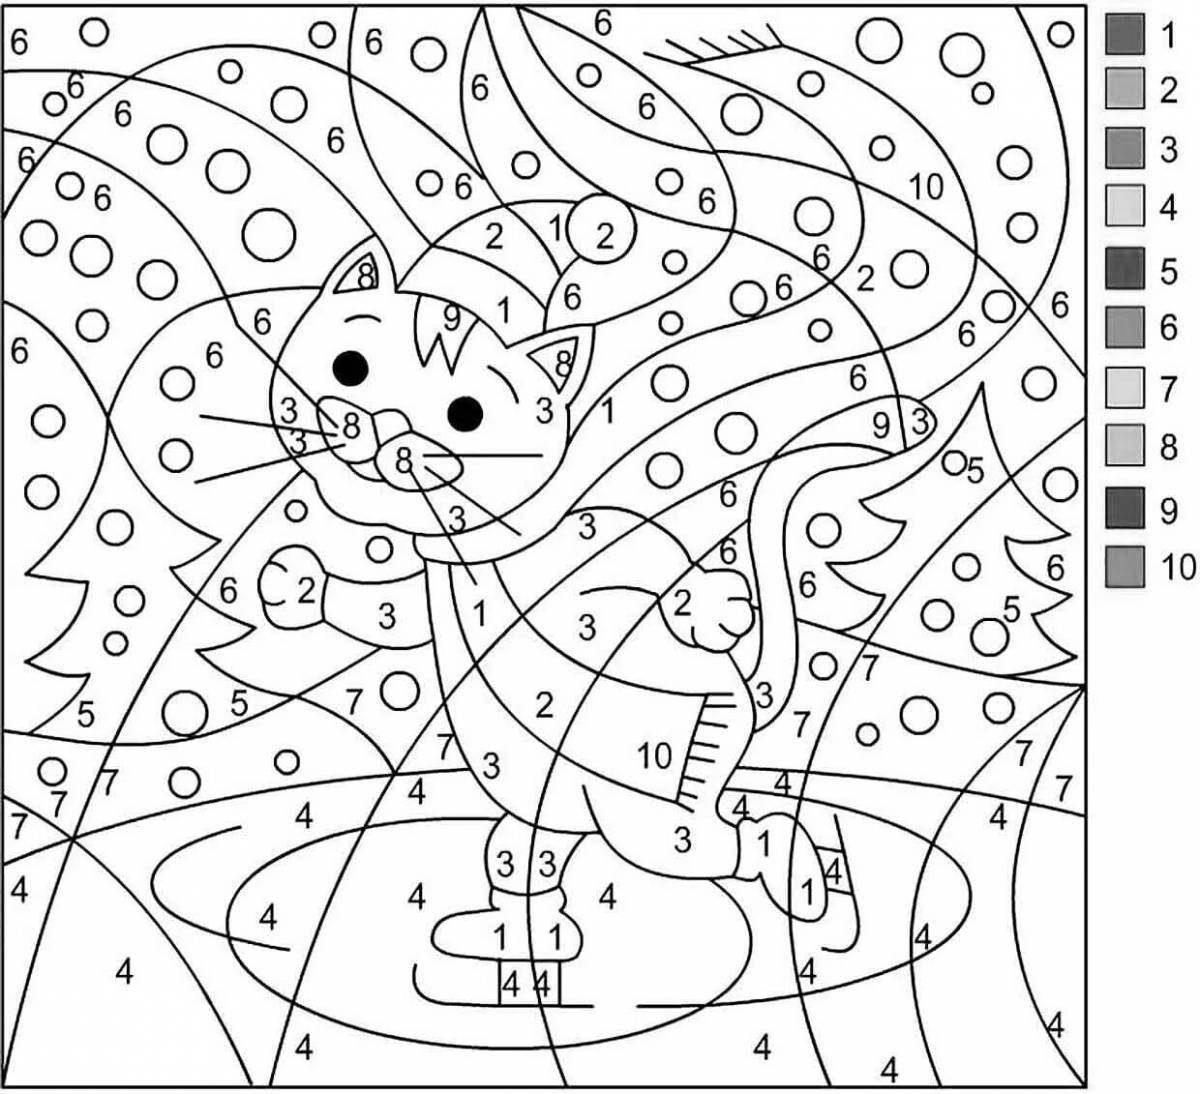 Color-brilliant coloring page by numbers hack